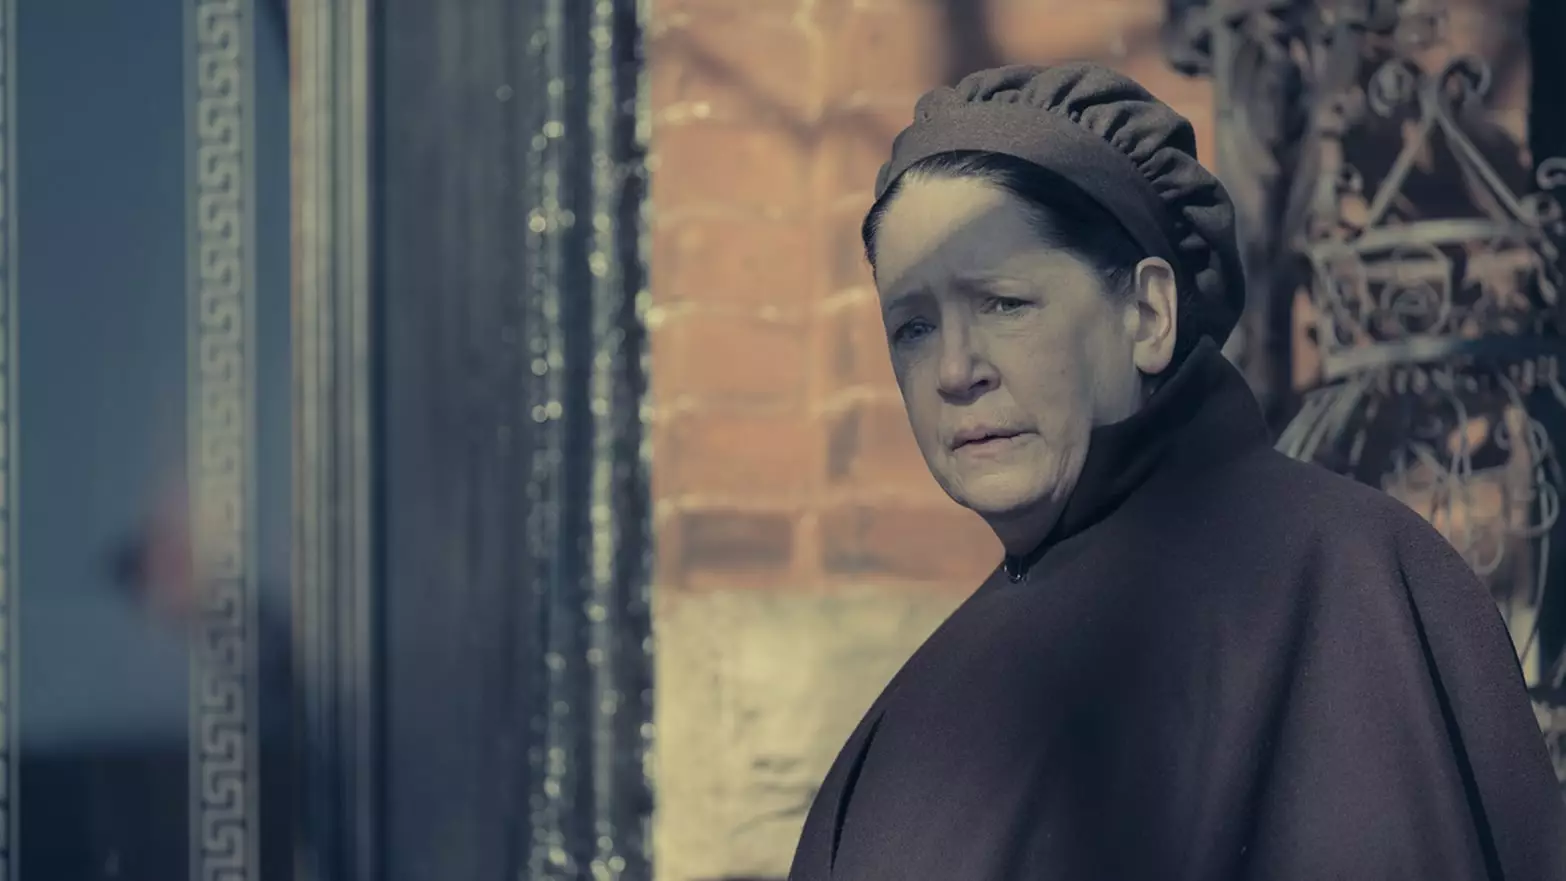 We expect to see Aunt Lydia played by Ann Dowd return for Season 4 (